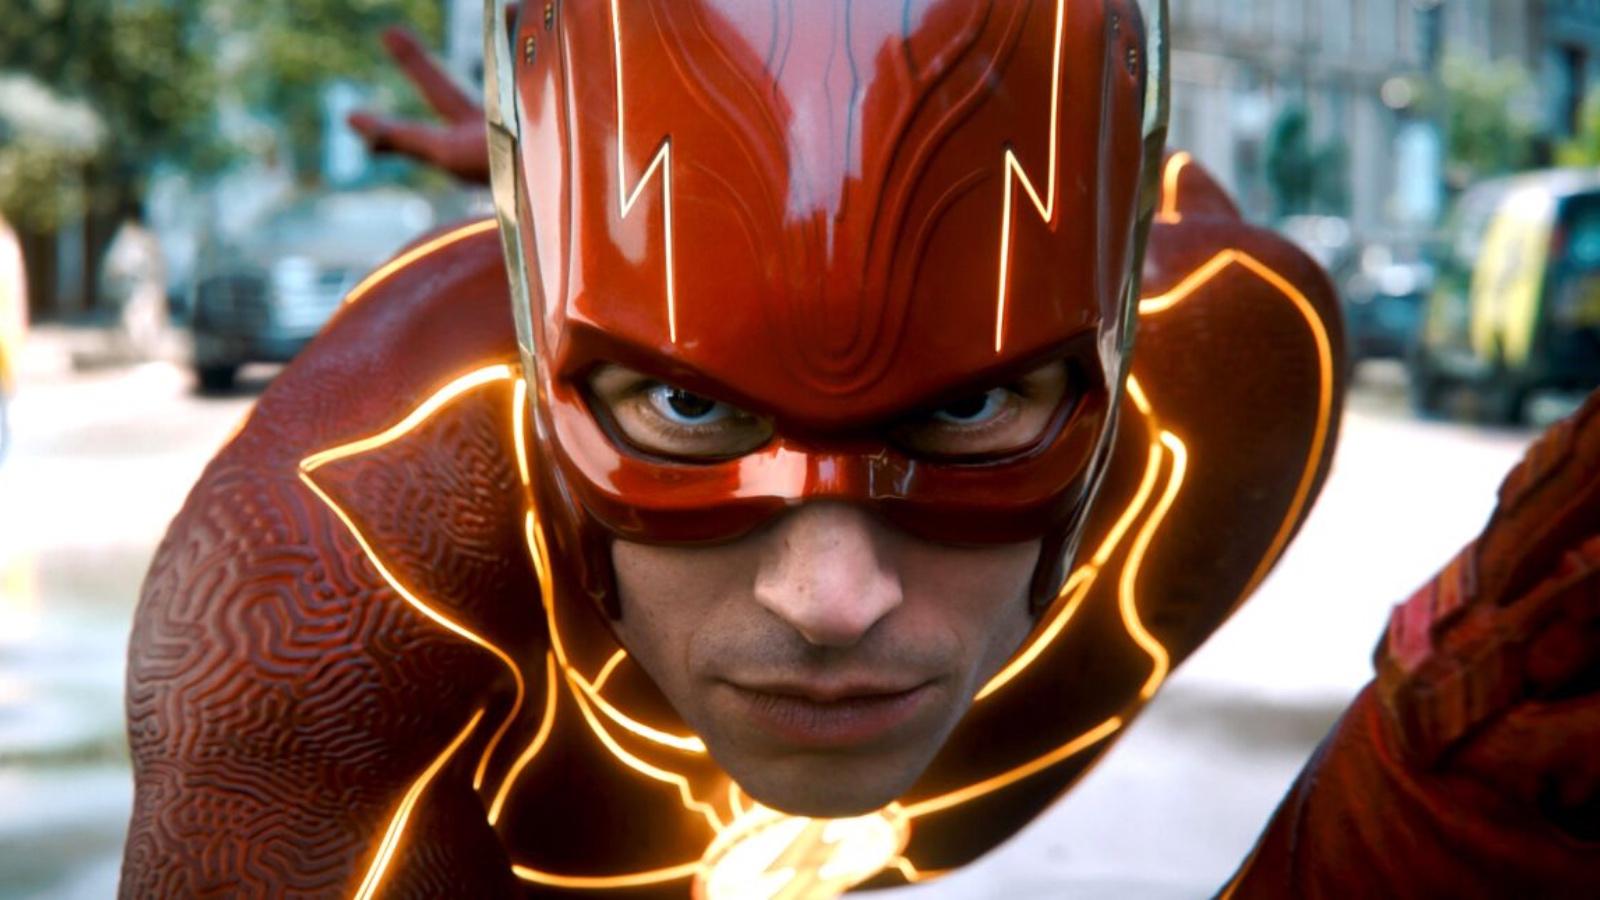 The Flash movie starred Ezra Miller as two version of Barry Allen.